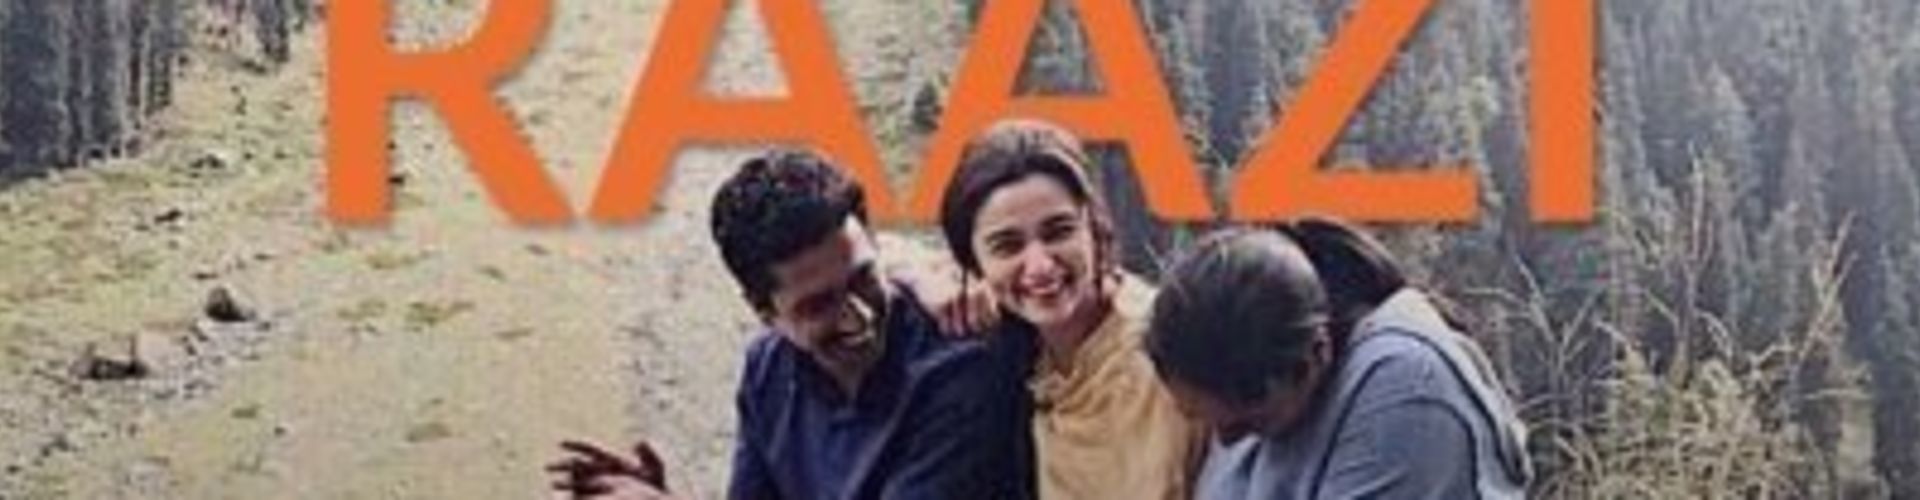 Alia Bhatt Starrer Raazi Gets a Release Date And First Poster